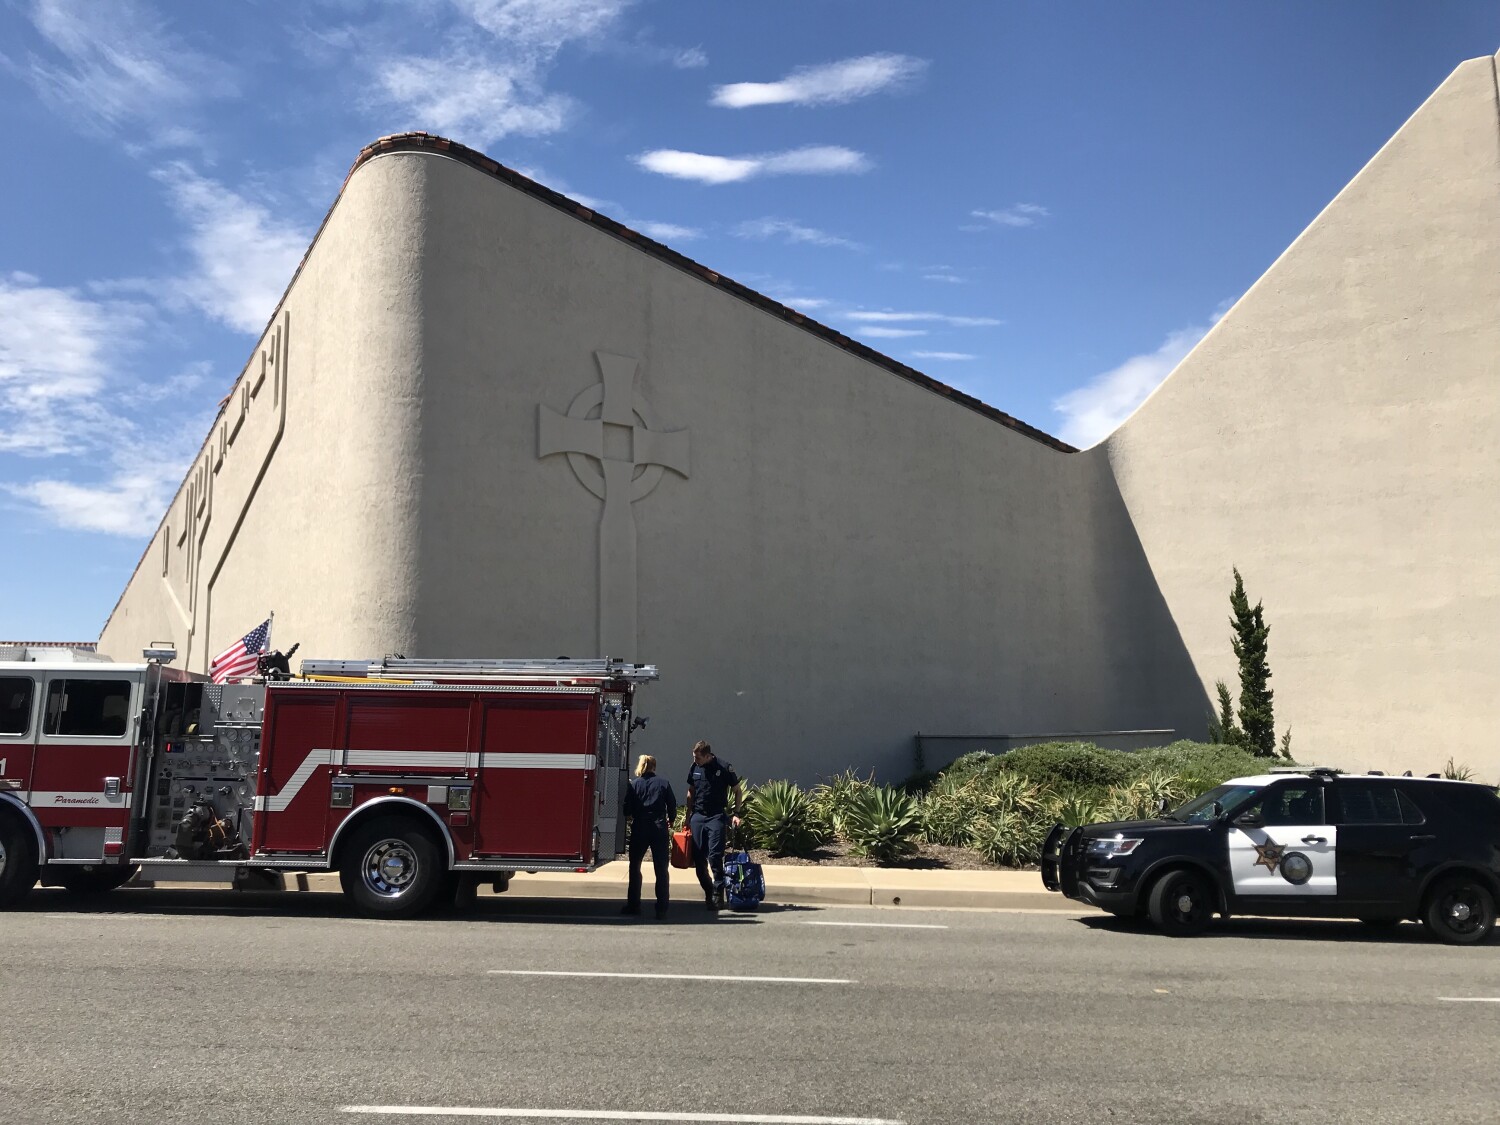 'Why? Why our community?': Laguna Woods shattered by mass shooting at church